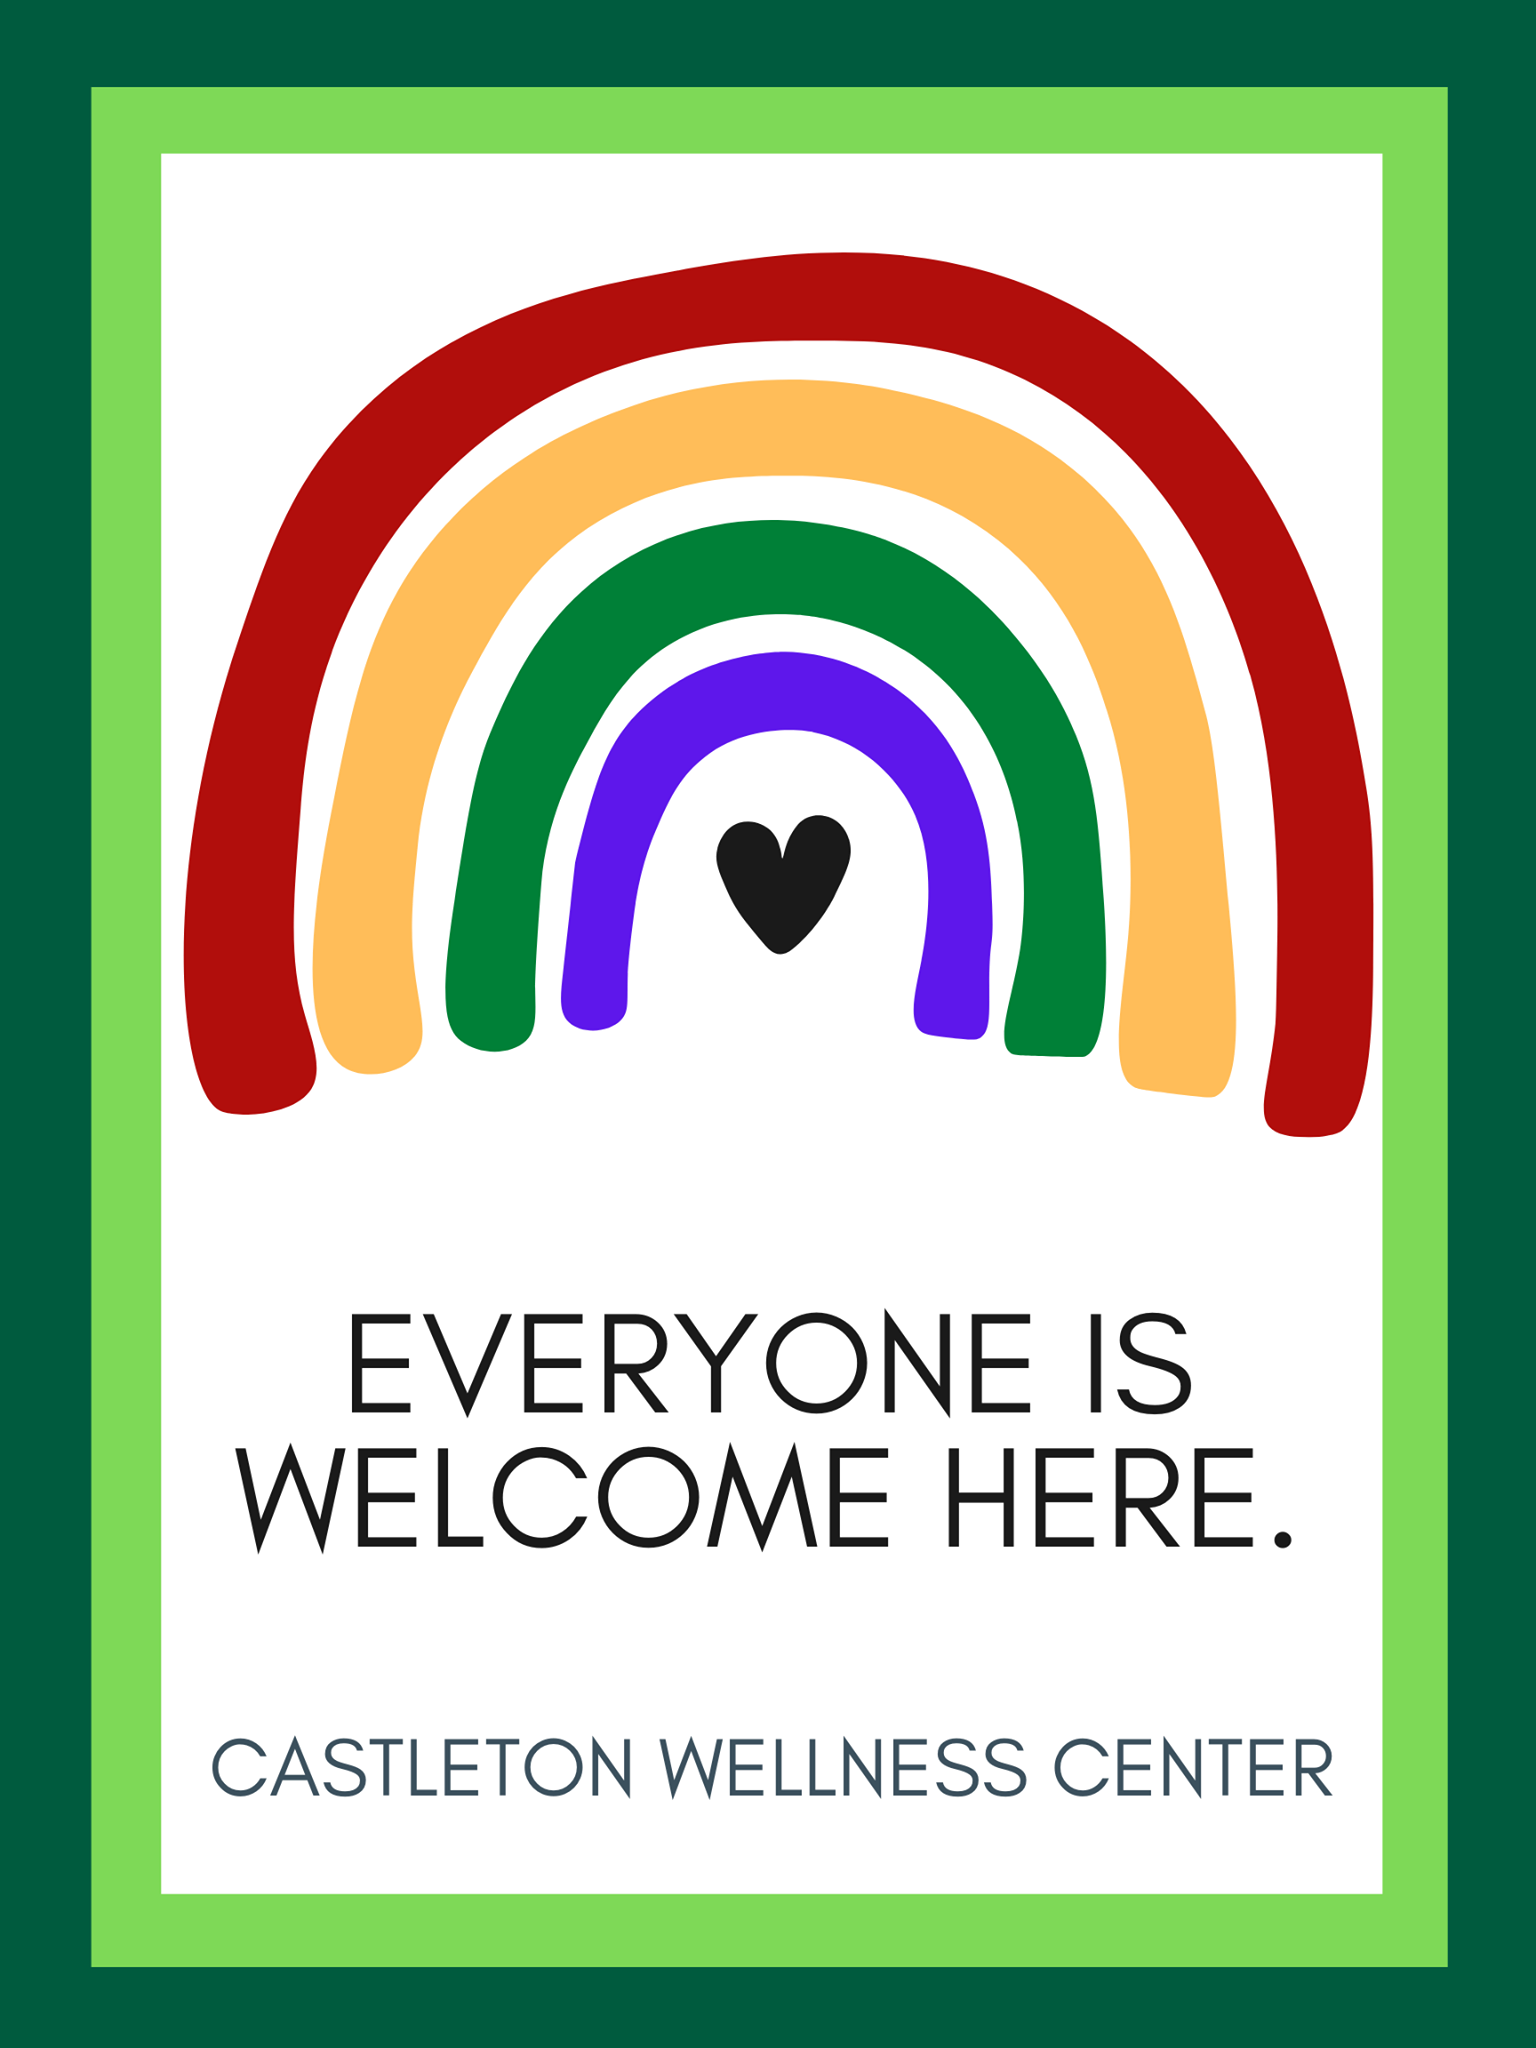 Welcome from the Wellness Center!